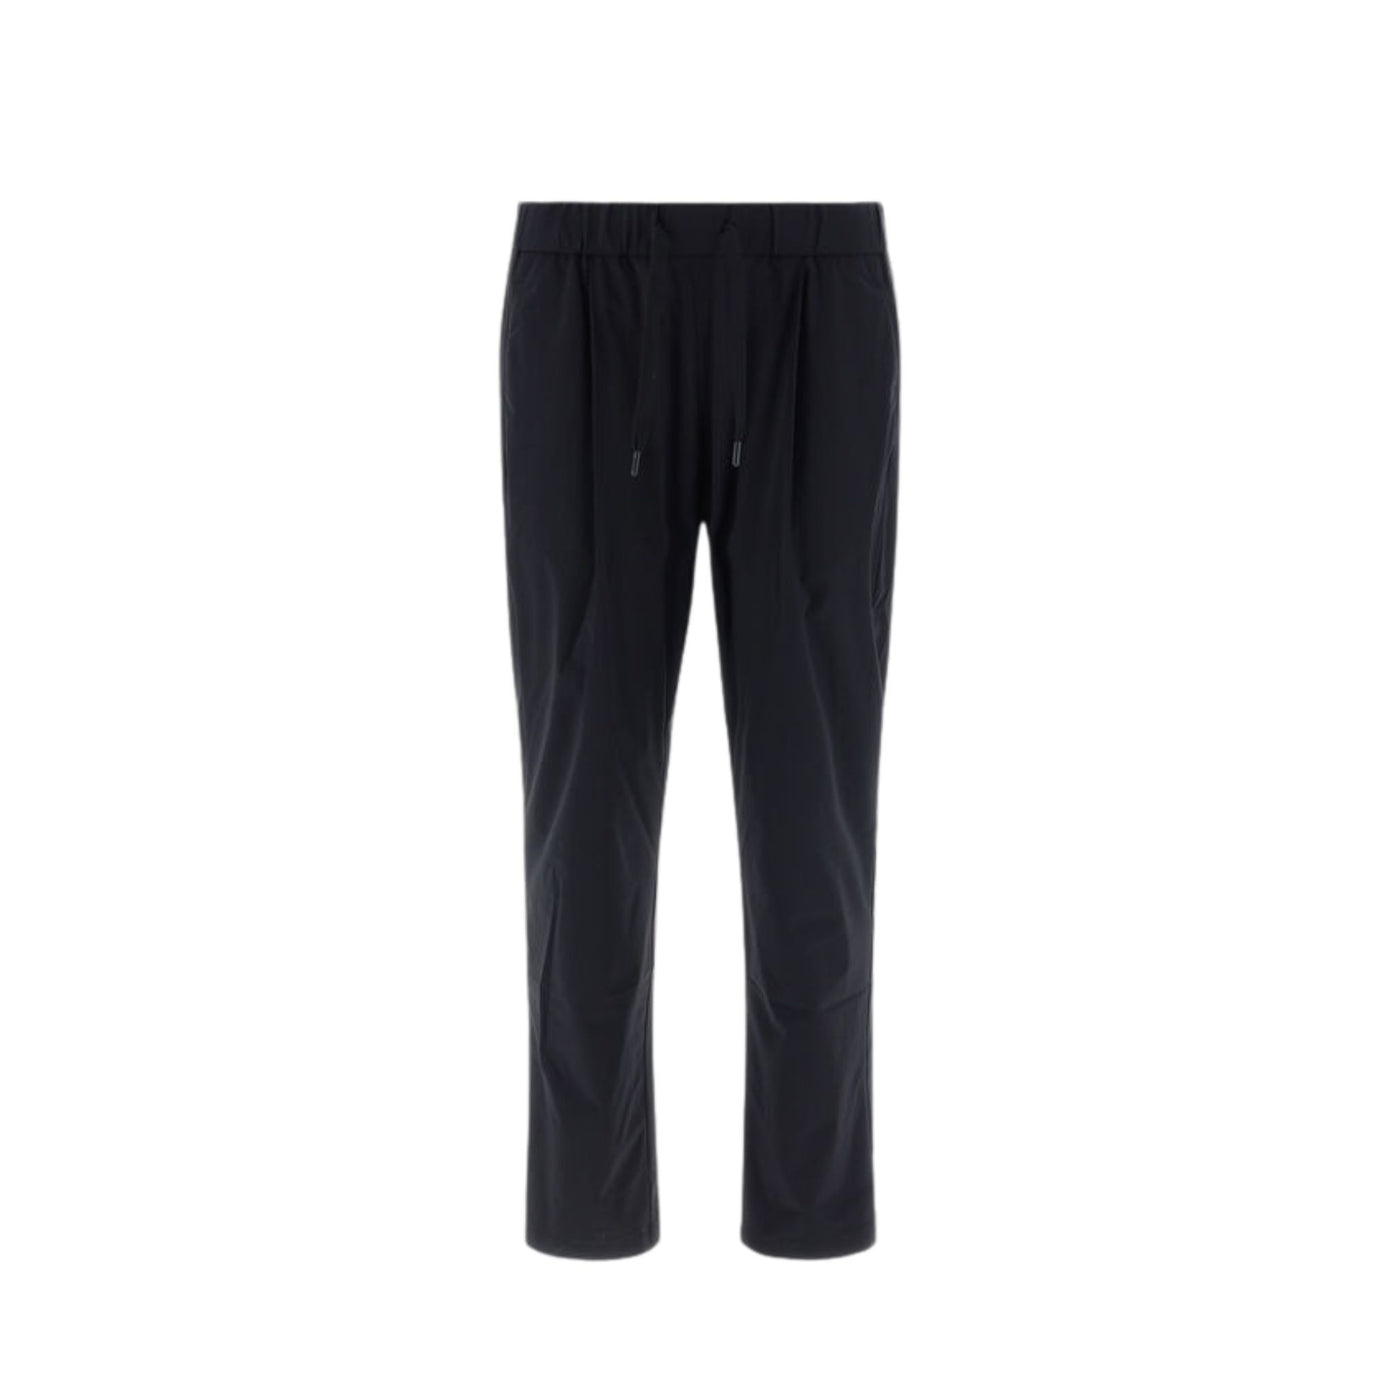 Women's trousers with French pockets